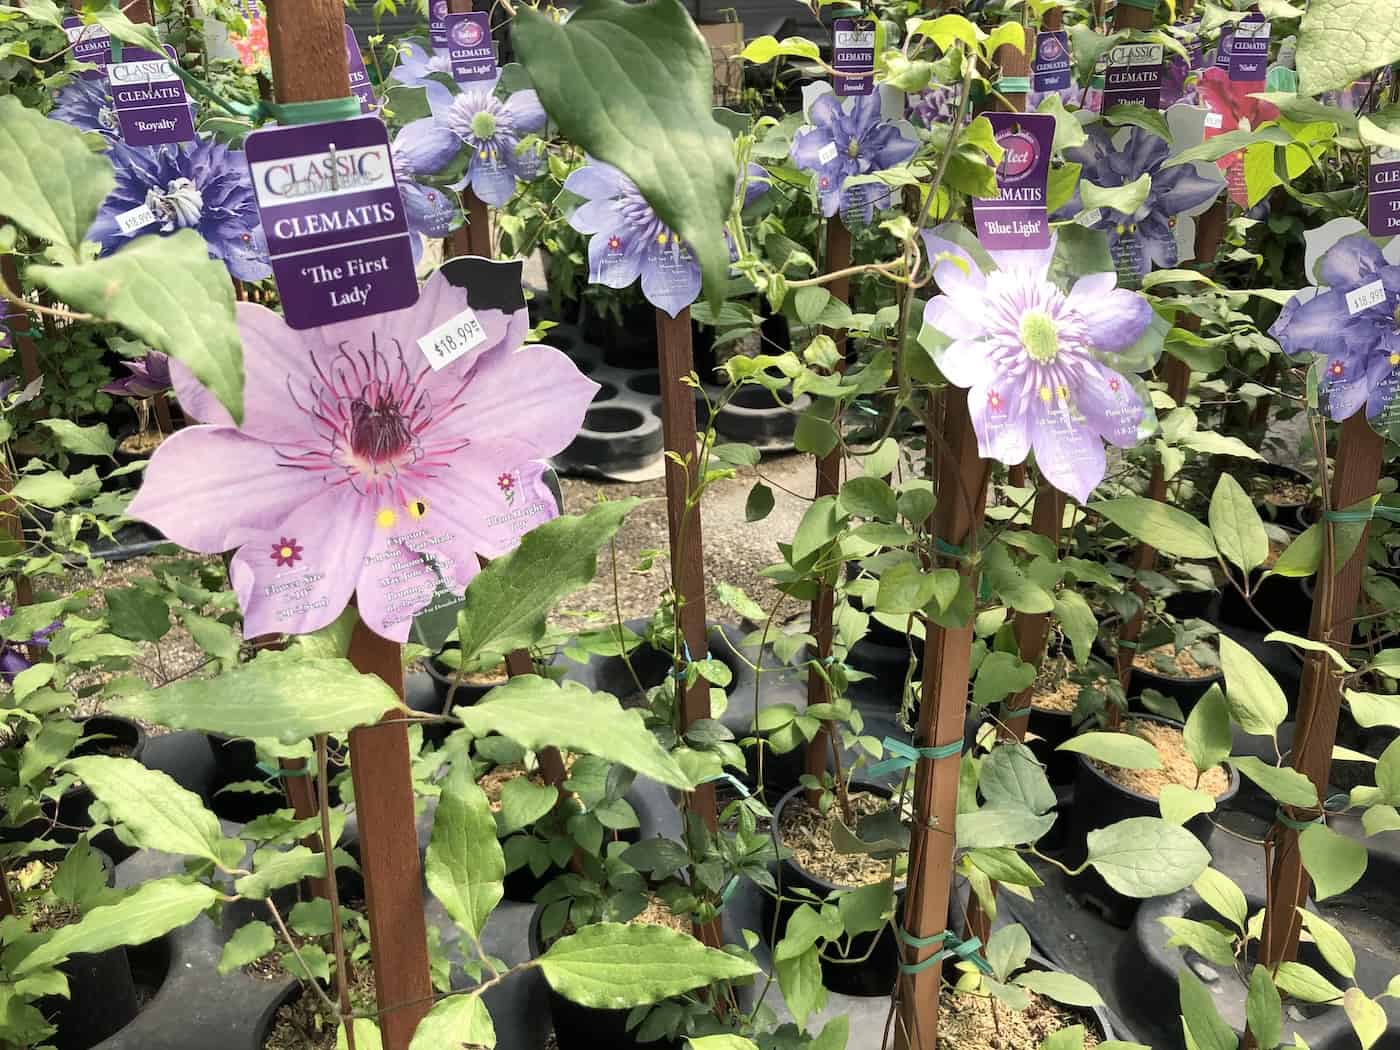 Clematis plants at nursery